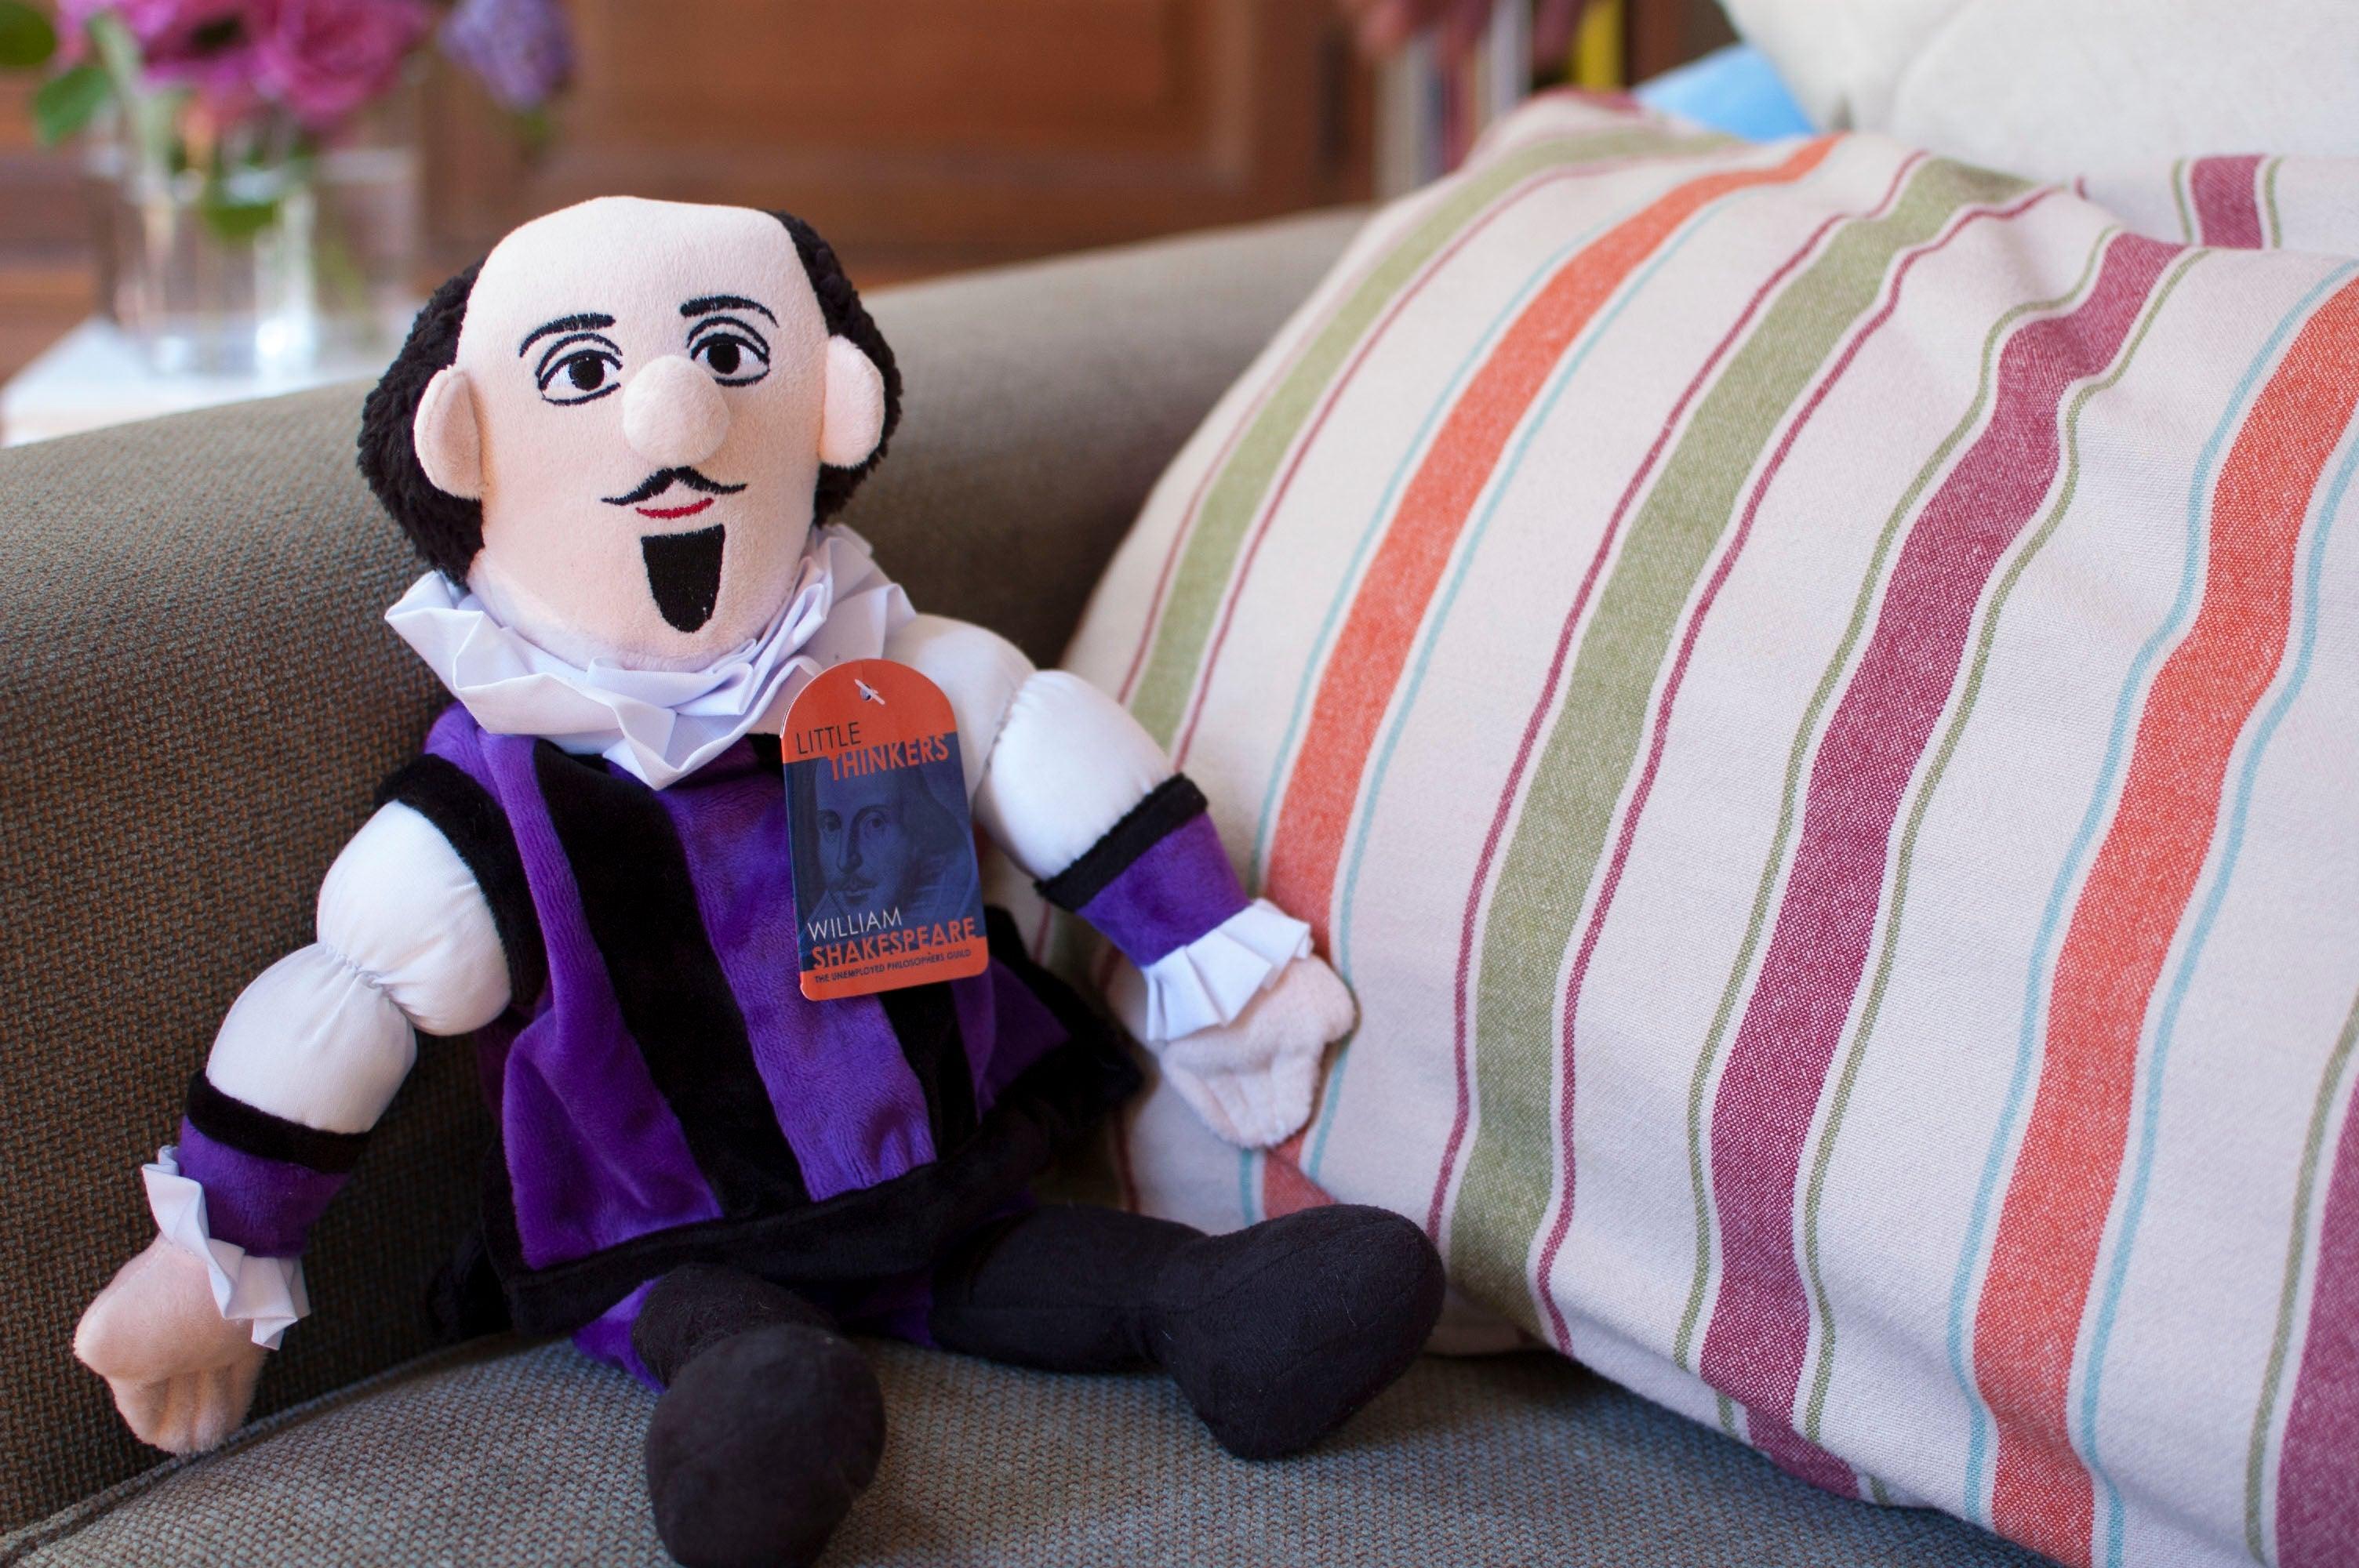 Product photo of William Shakespeare Plush Doll, a novelty gift manufactured by The Unemployed Philosophers Guild.